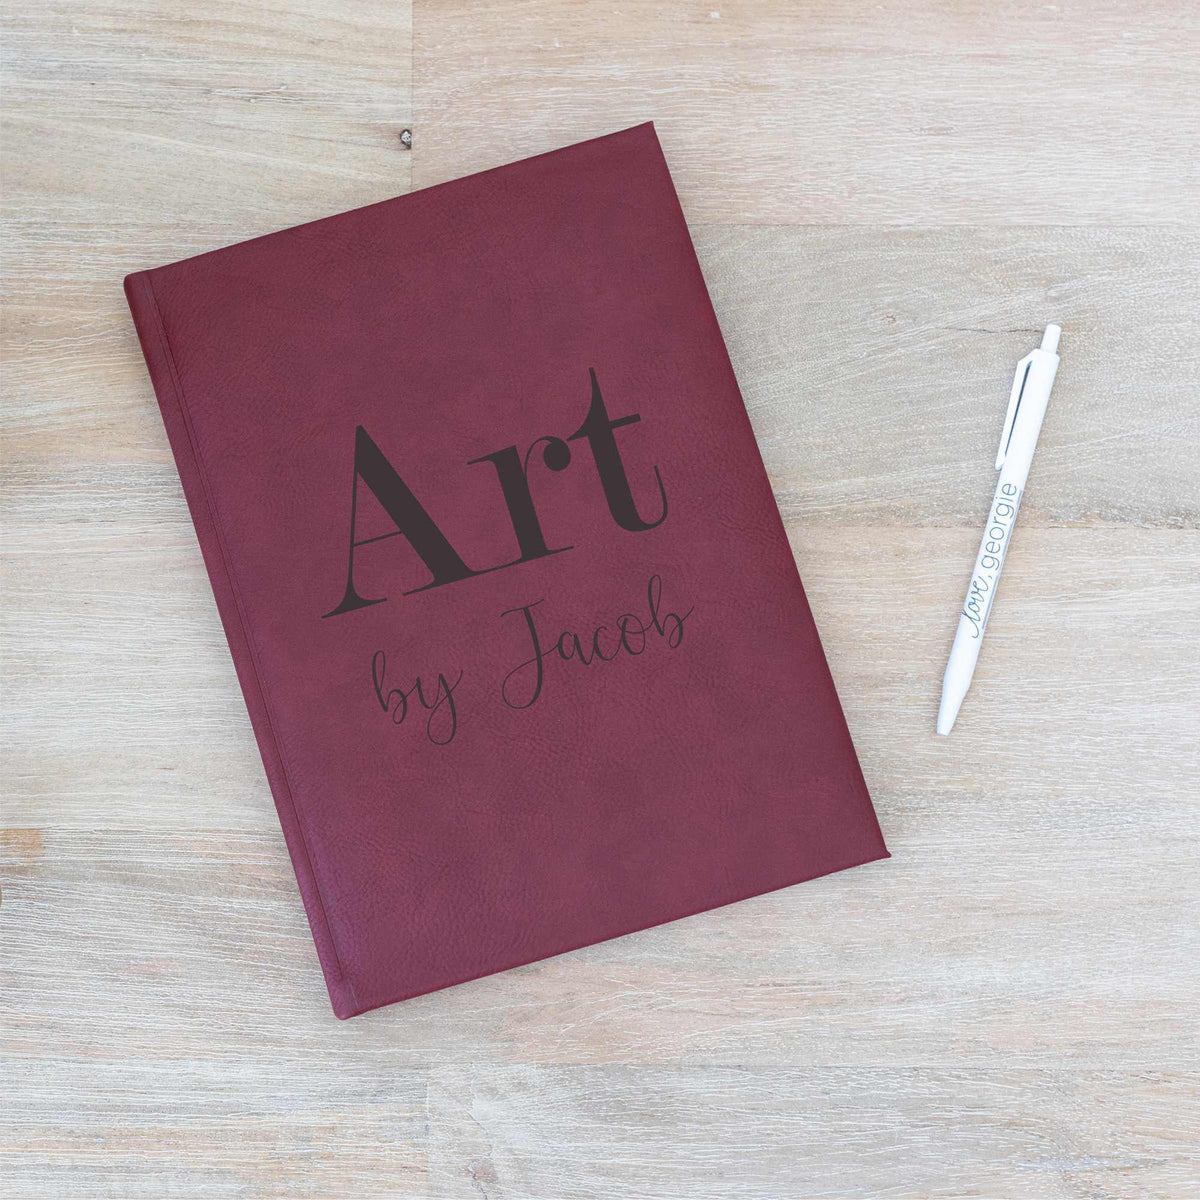 Personalized Sketchbook Ideas and Sketchs Journal Vegan Leather Sketchbook  Personalized Art Notebook Pink Sketchbook With Name 